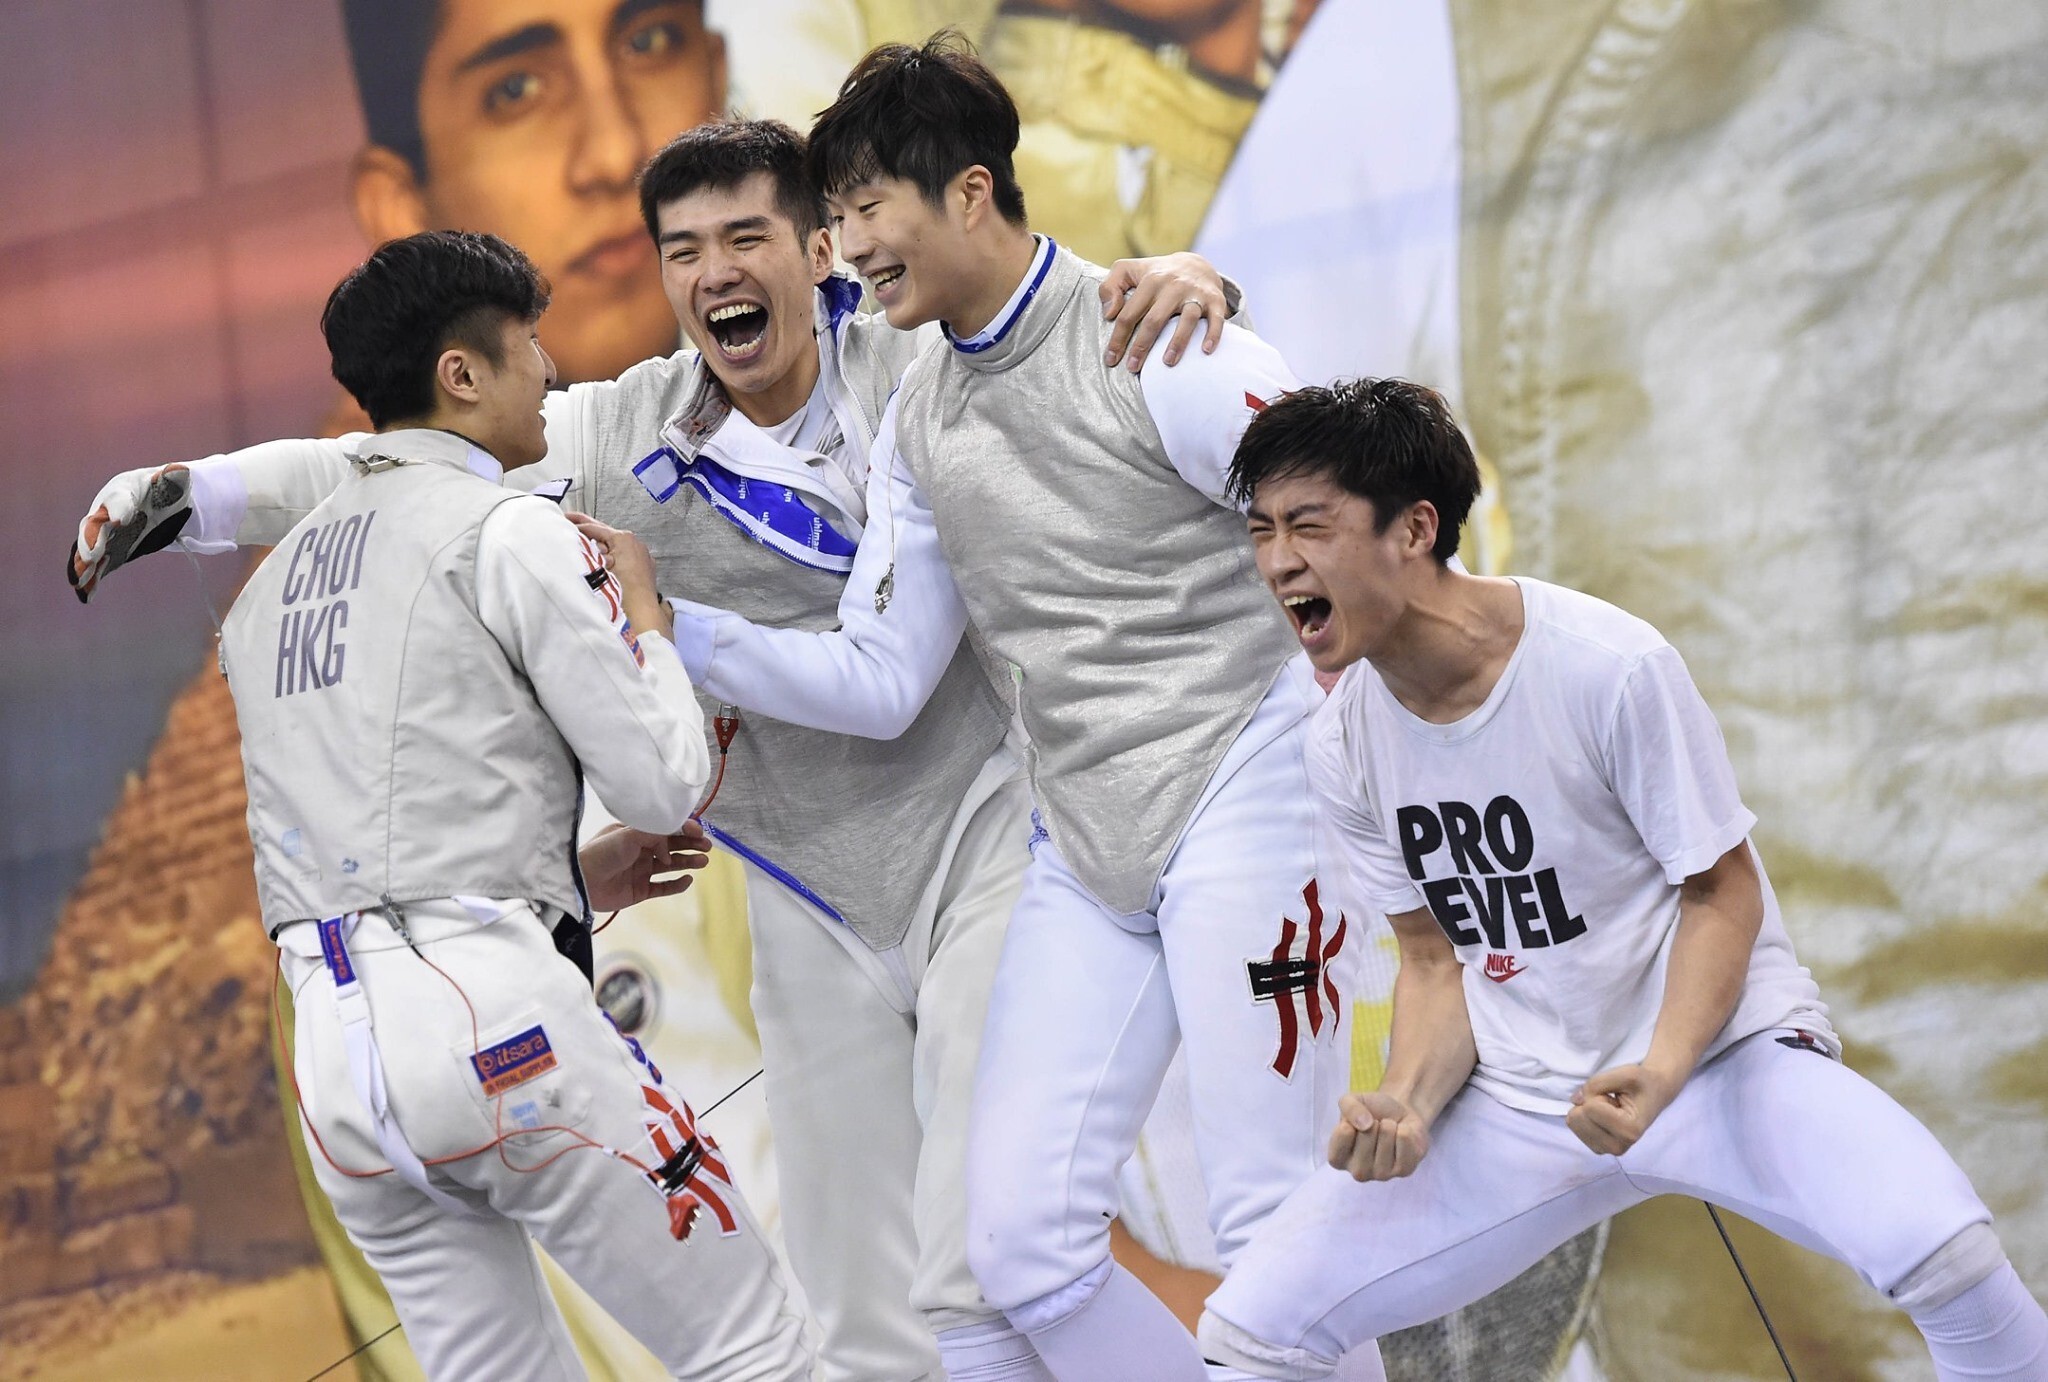 A moment of joy at the World Cup in Cairo. From left: Ryan Choi, Cheung Siu-lun, Cheung Ka-long and Lawrence Ng celebrate after Hong Kong punch their ticket for the Tokyo Olympics in the team foil competition. Photo: FIE